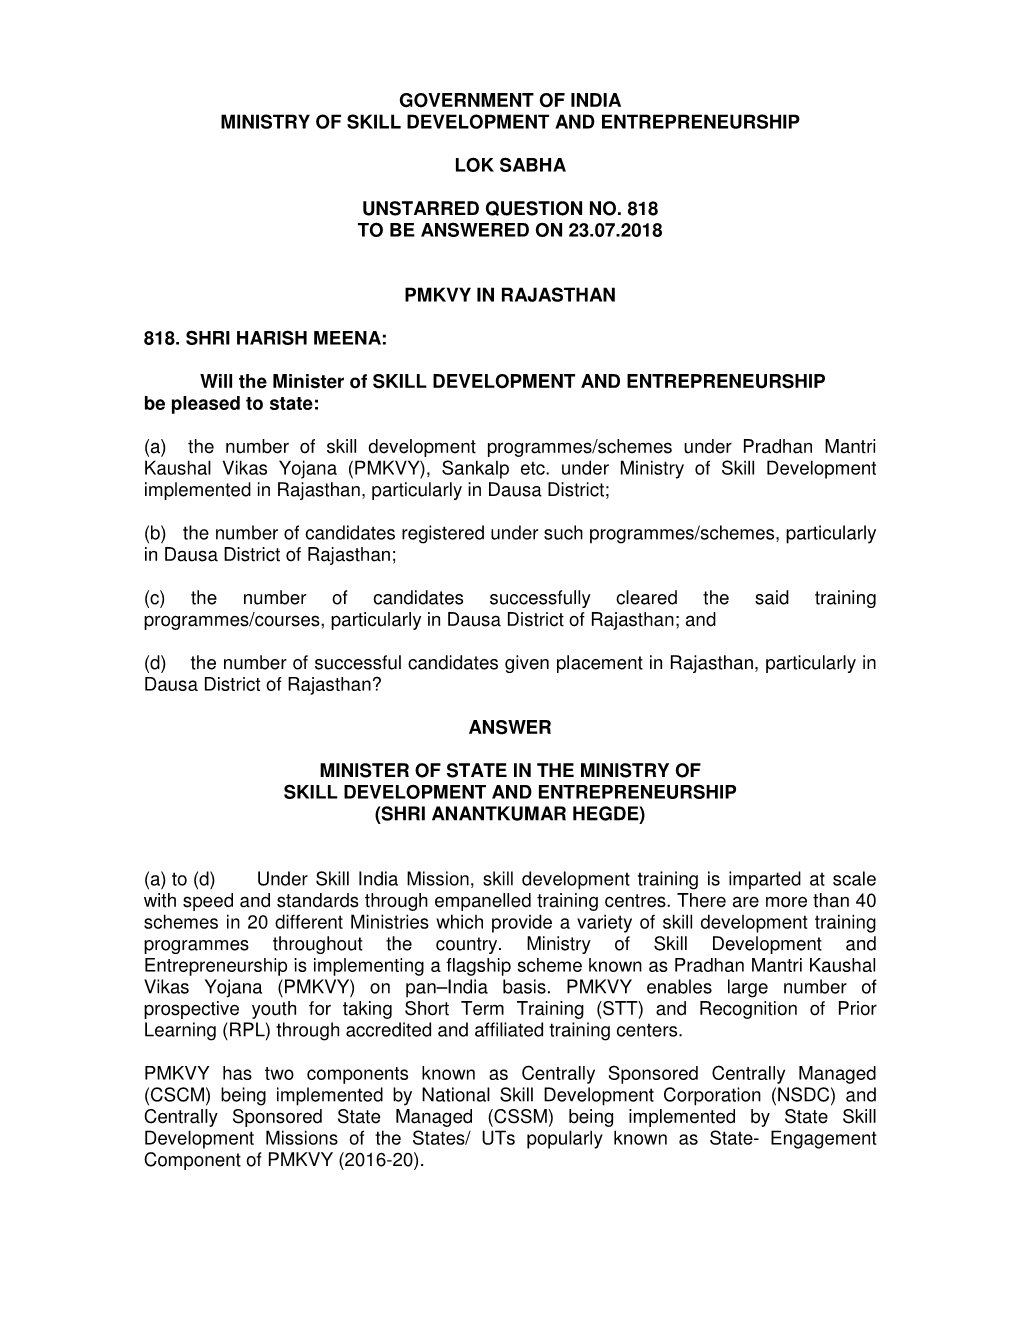 Government of India Ministry of Skill Development and Entrepreneurship Lok Sabha Unstarred Question No. 818 to Be Answered on 23